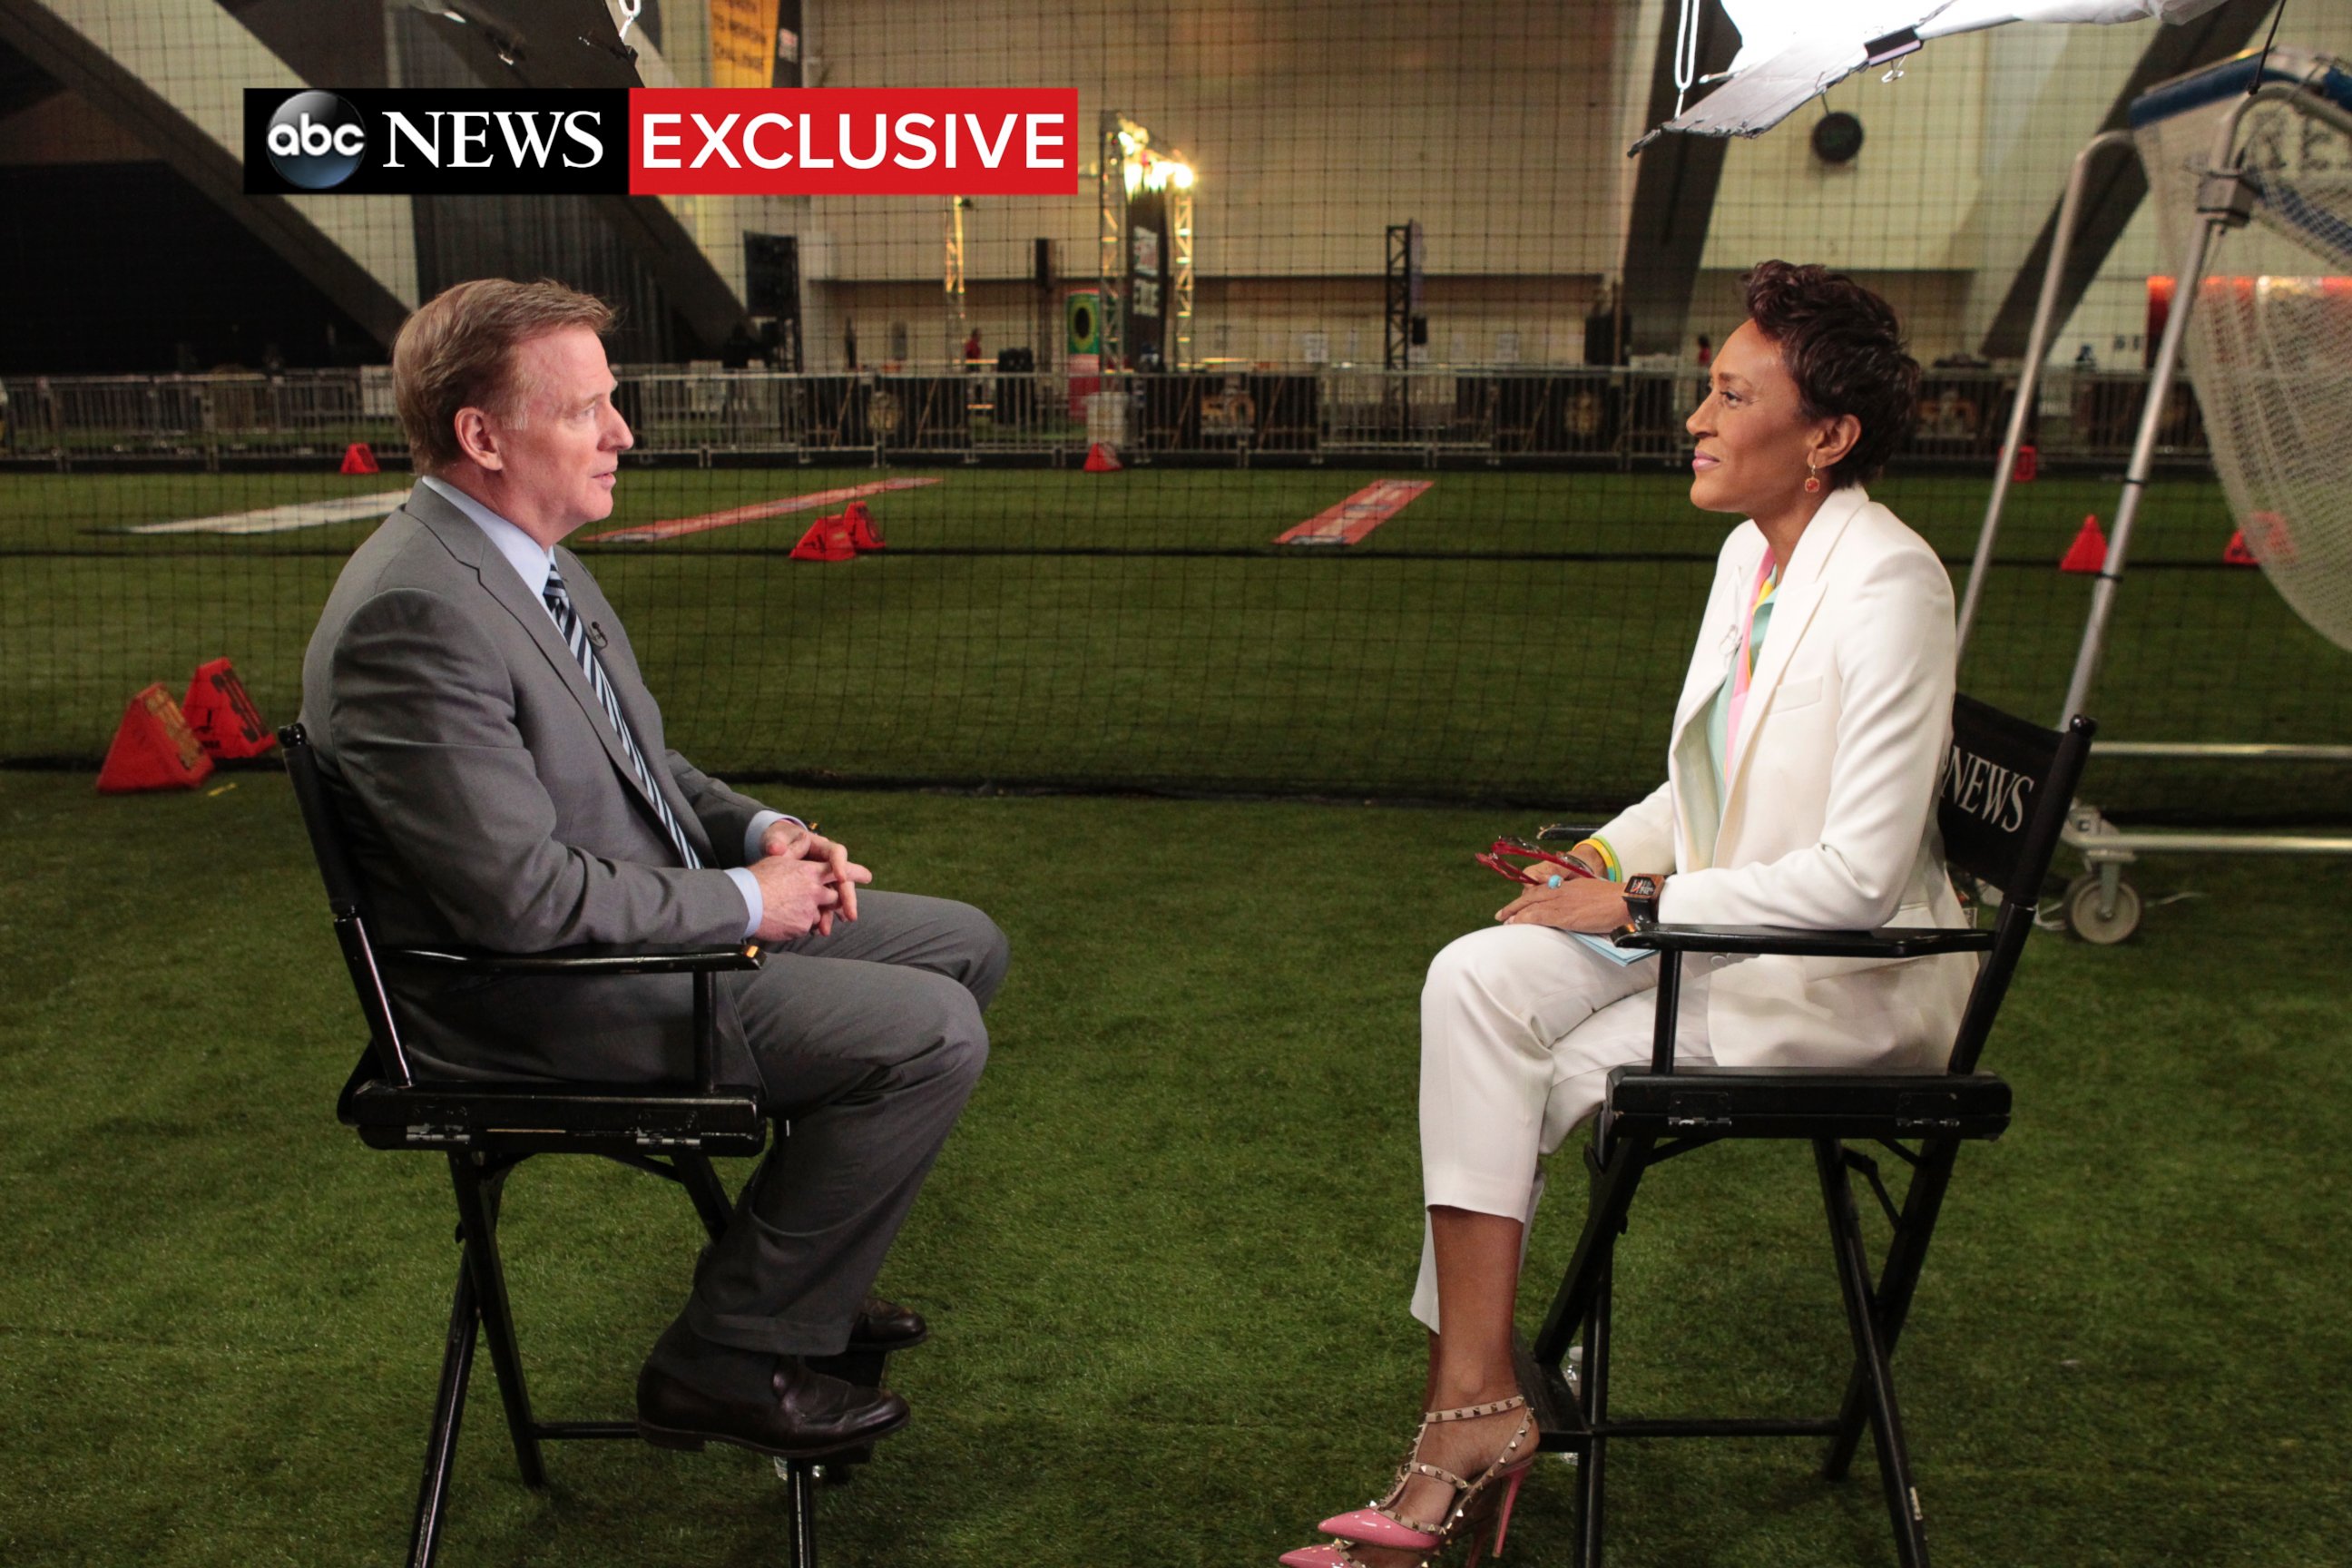 PHOTO: ABC News' Robin Roberts interviews NFL commissioner Roger Goodell on Feb. 4, 2016.